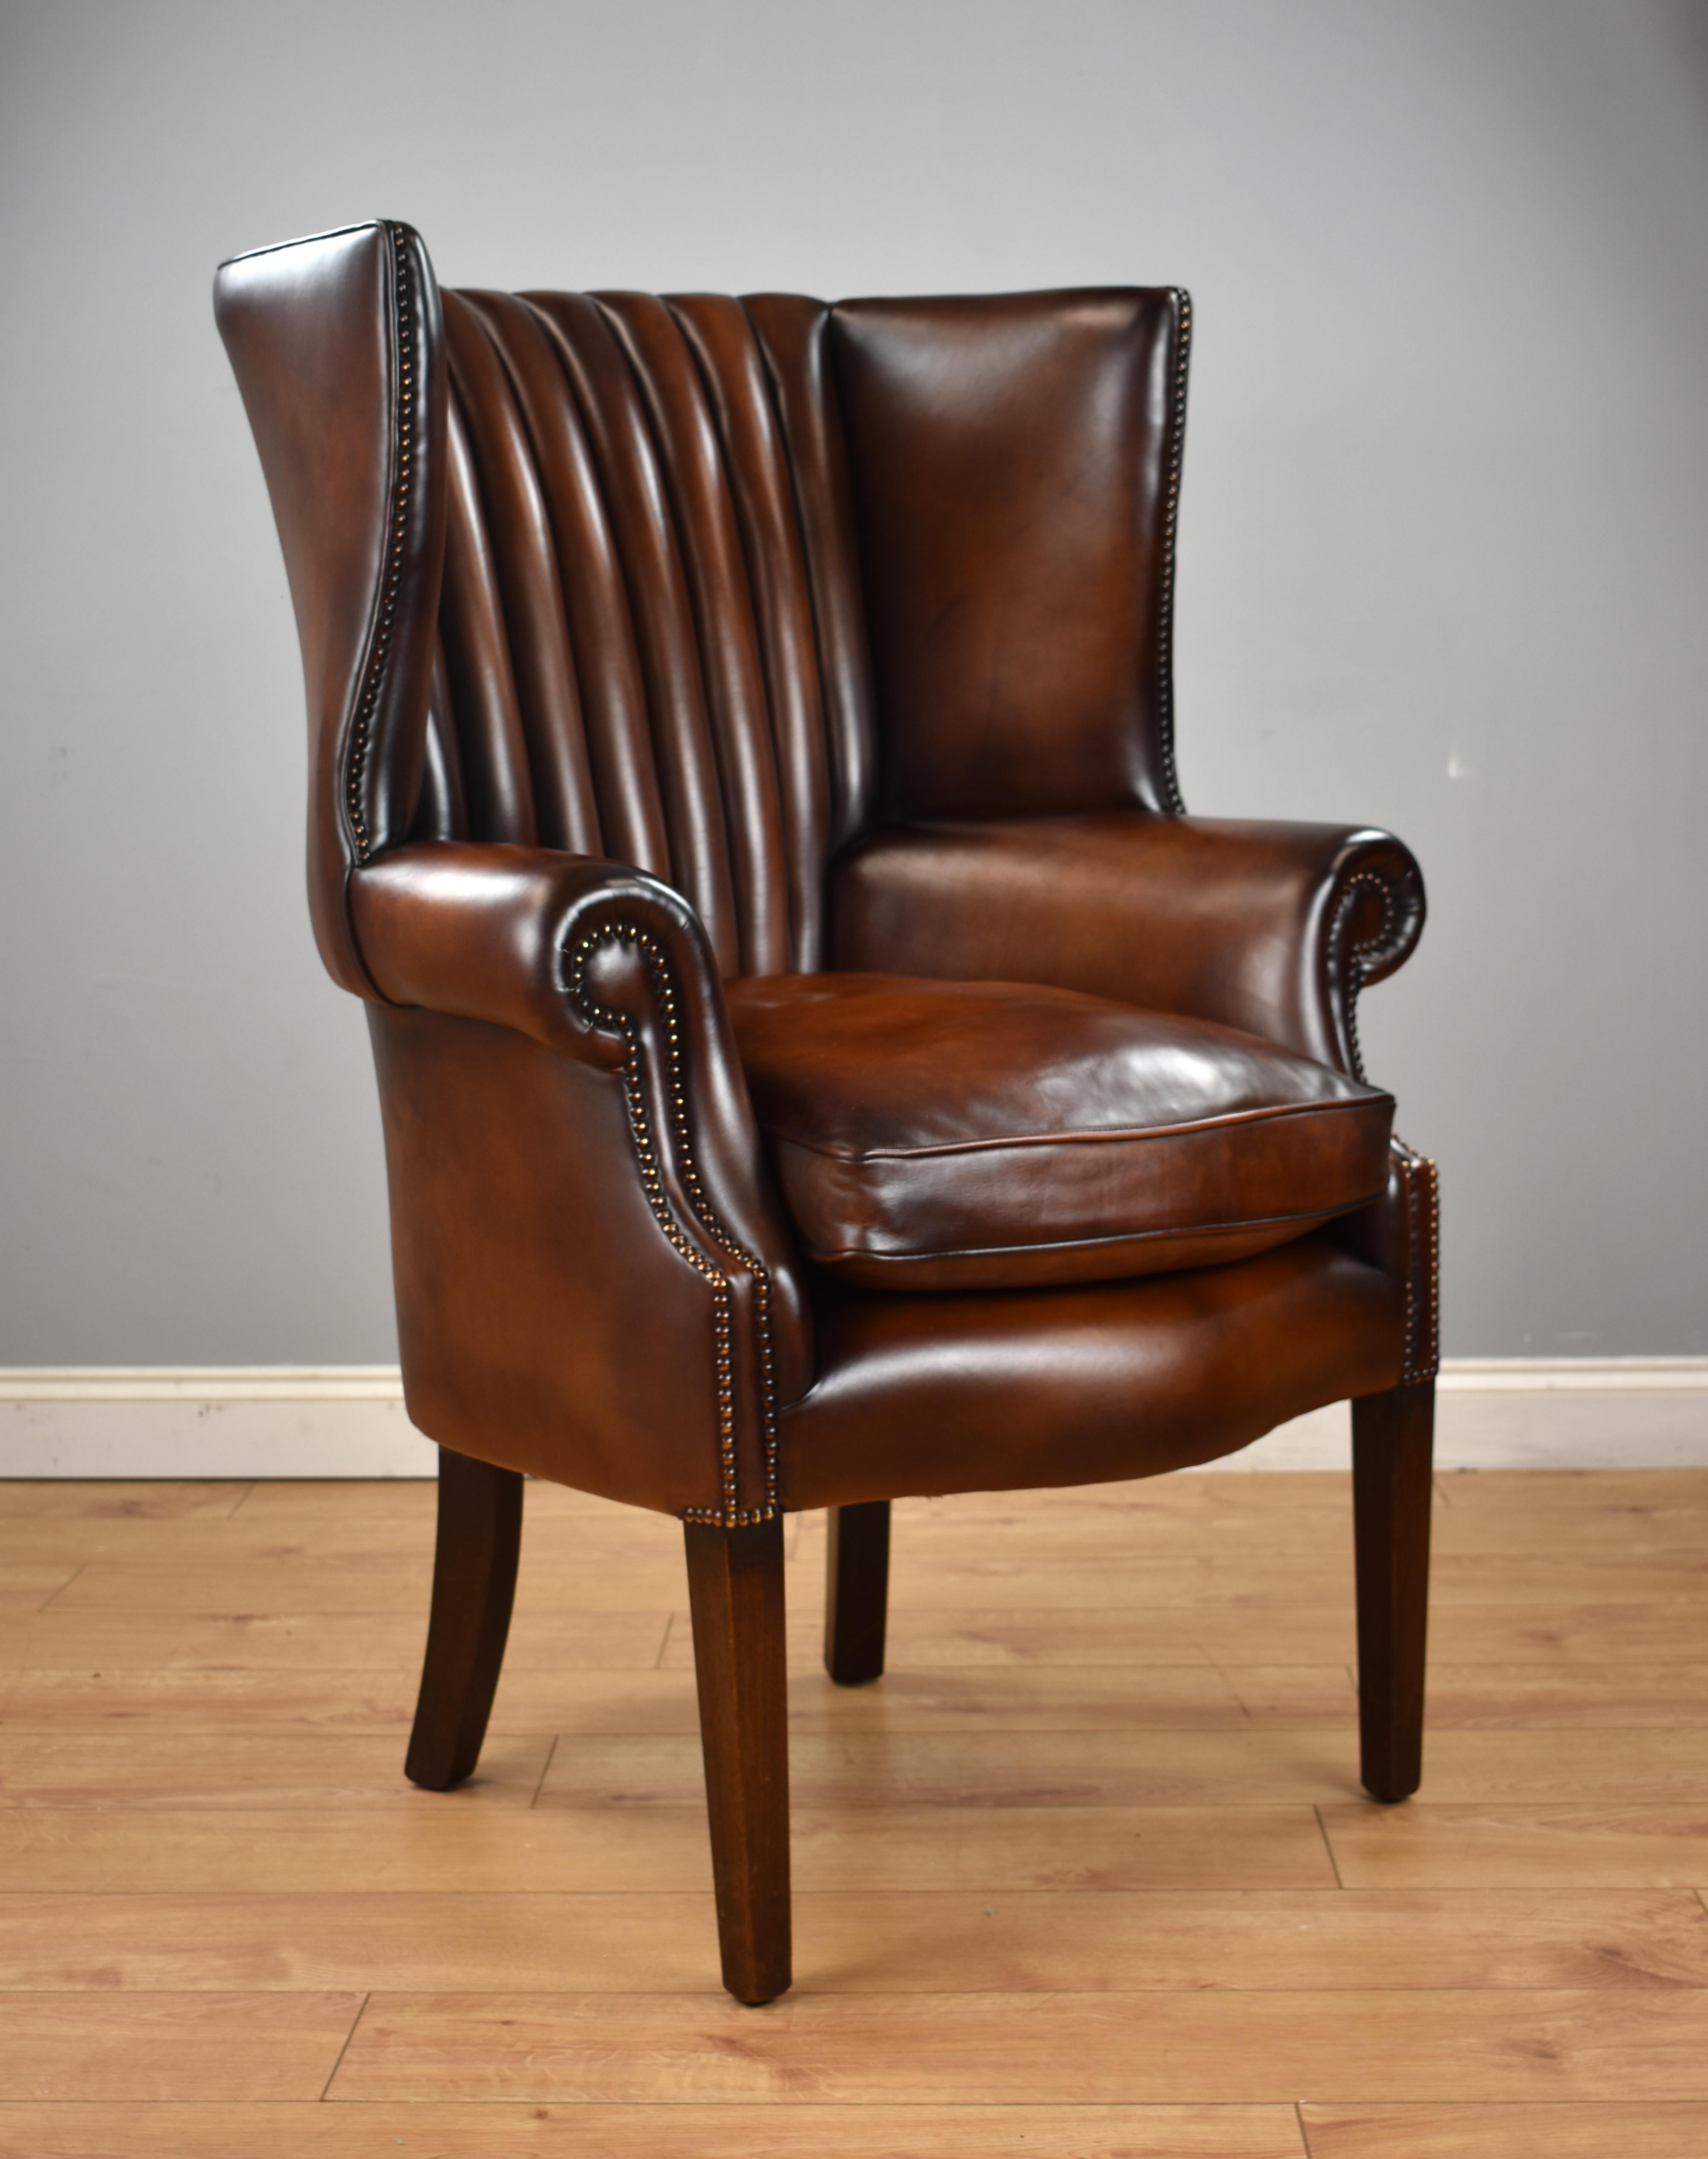 For sale is a fine quality antique mahogany and leather barrel back armchair. Upholstered in quality natural hide and colored by hand, standing on square tapering legs. This chair is in excellent condition.

Measures: Width 34.5